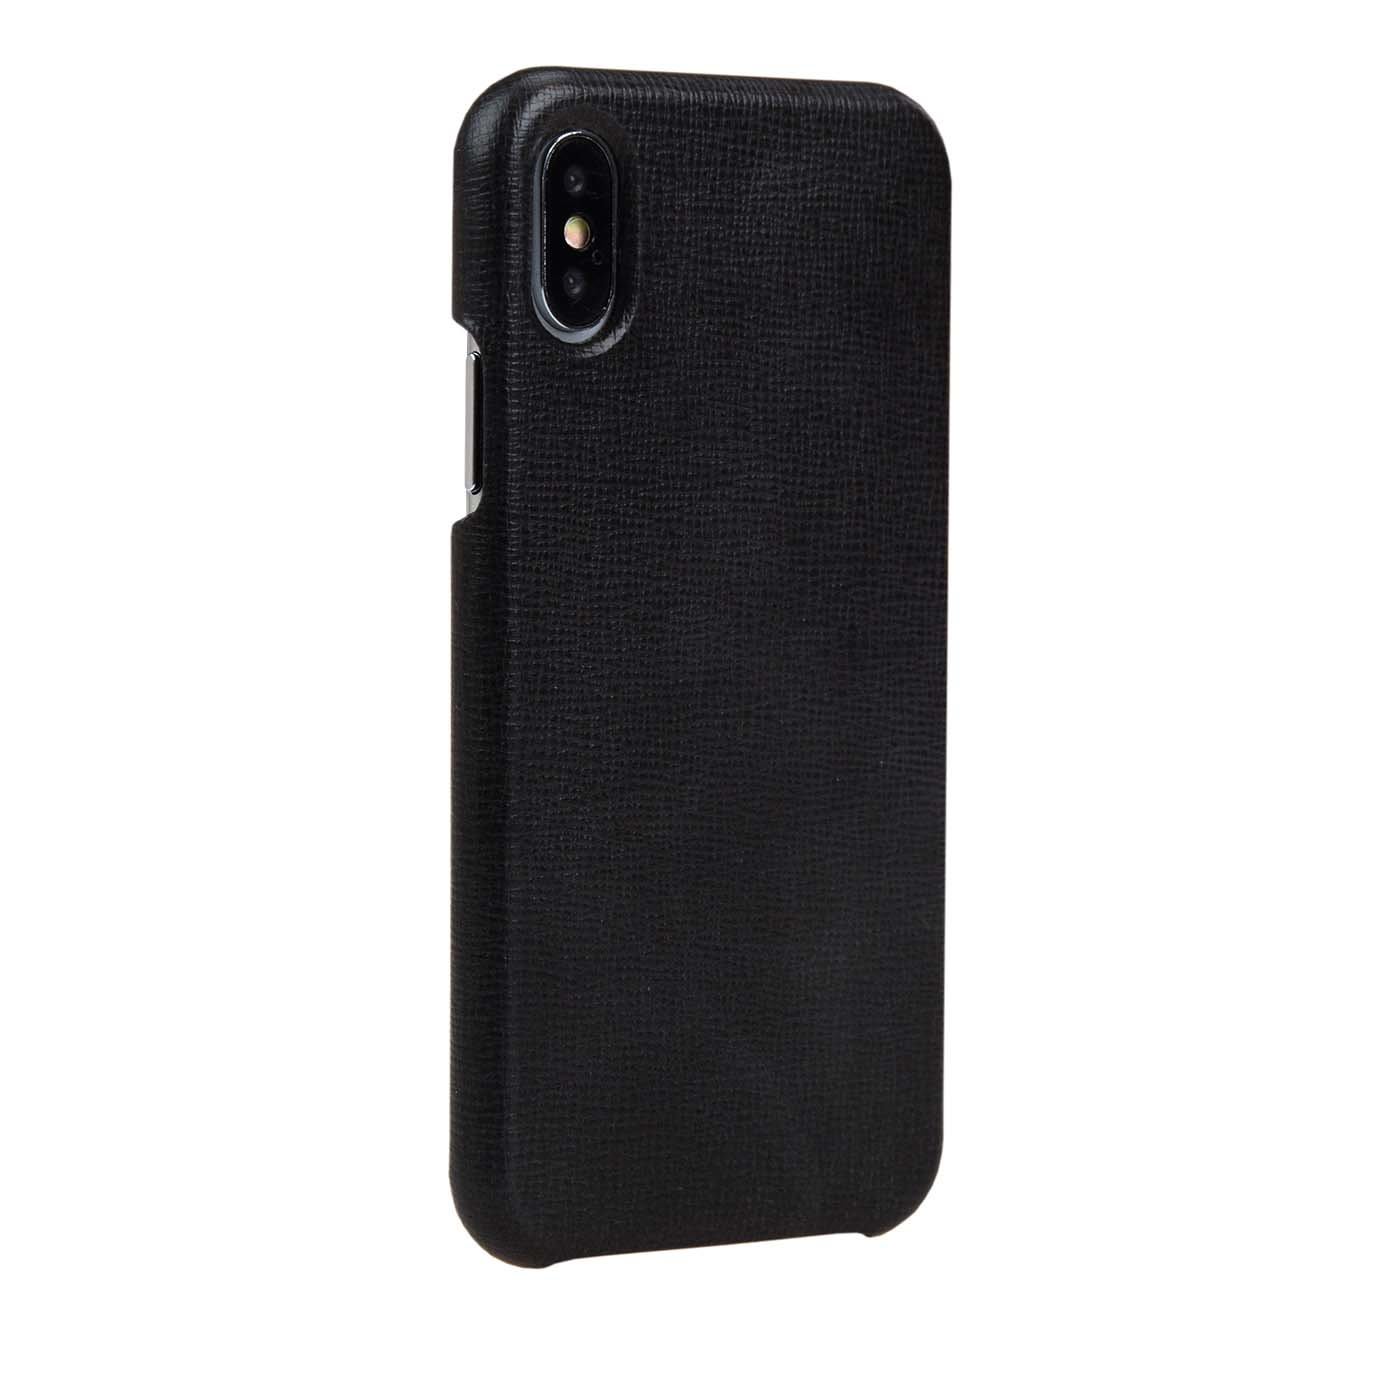 Black Saffiano Leather Shell Cover - Carastyle